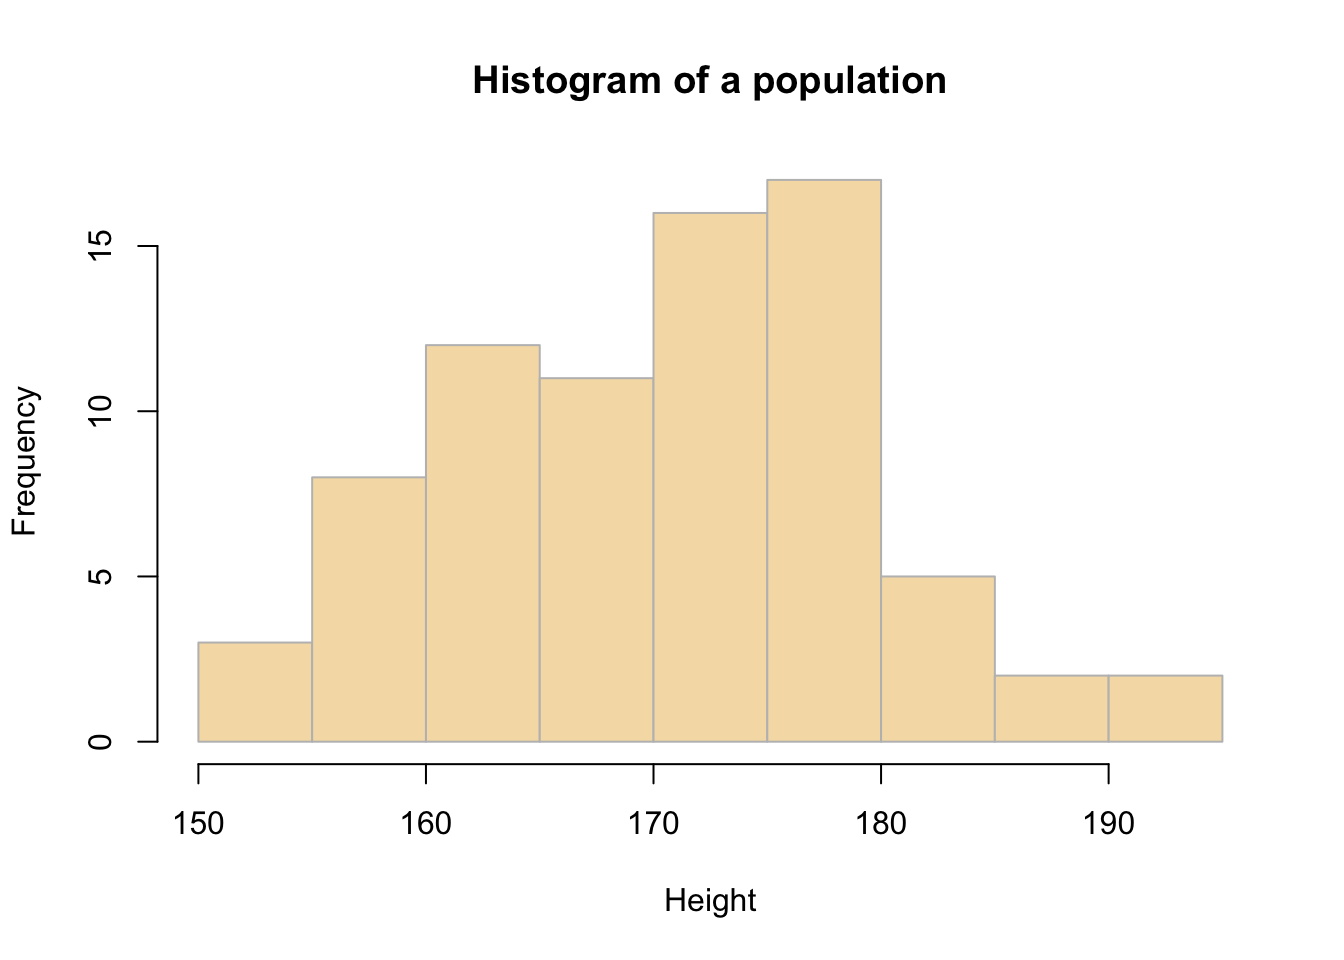 The distribution of the Height variable.